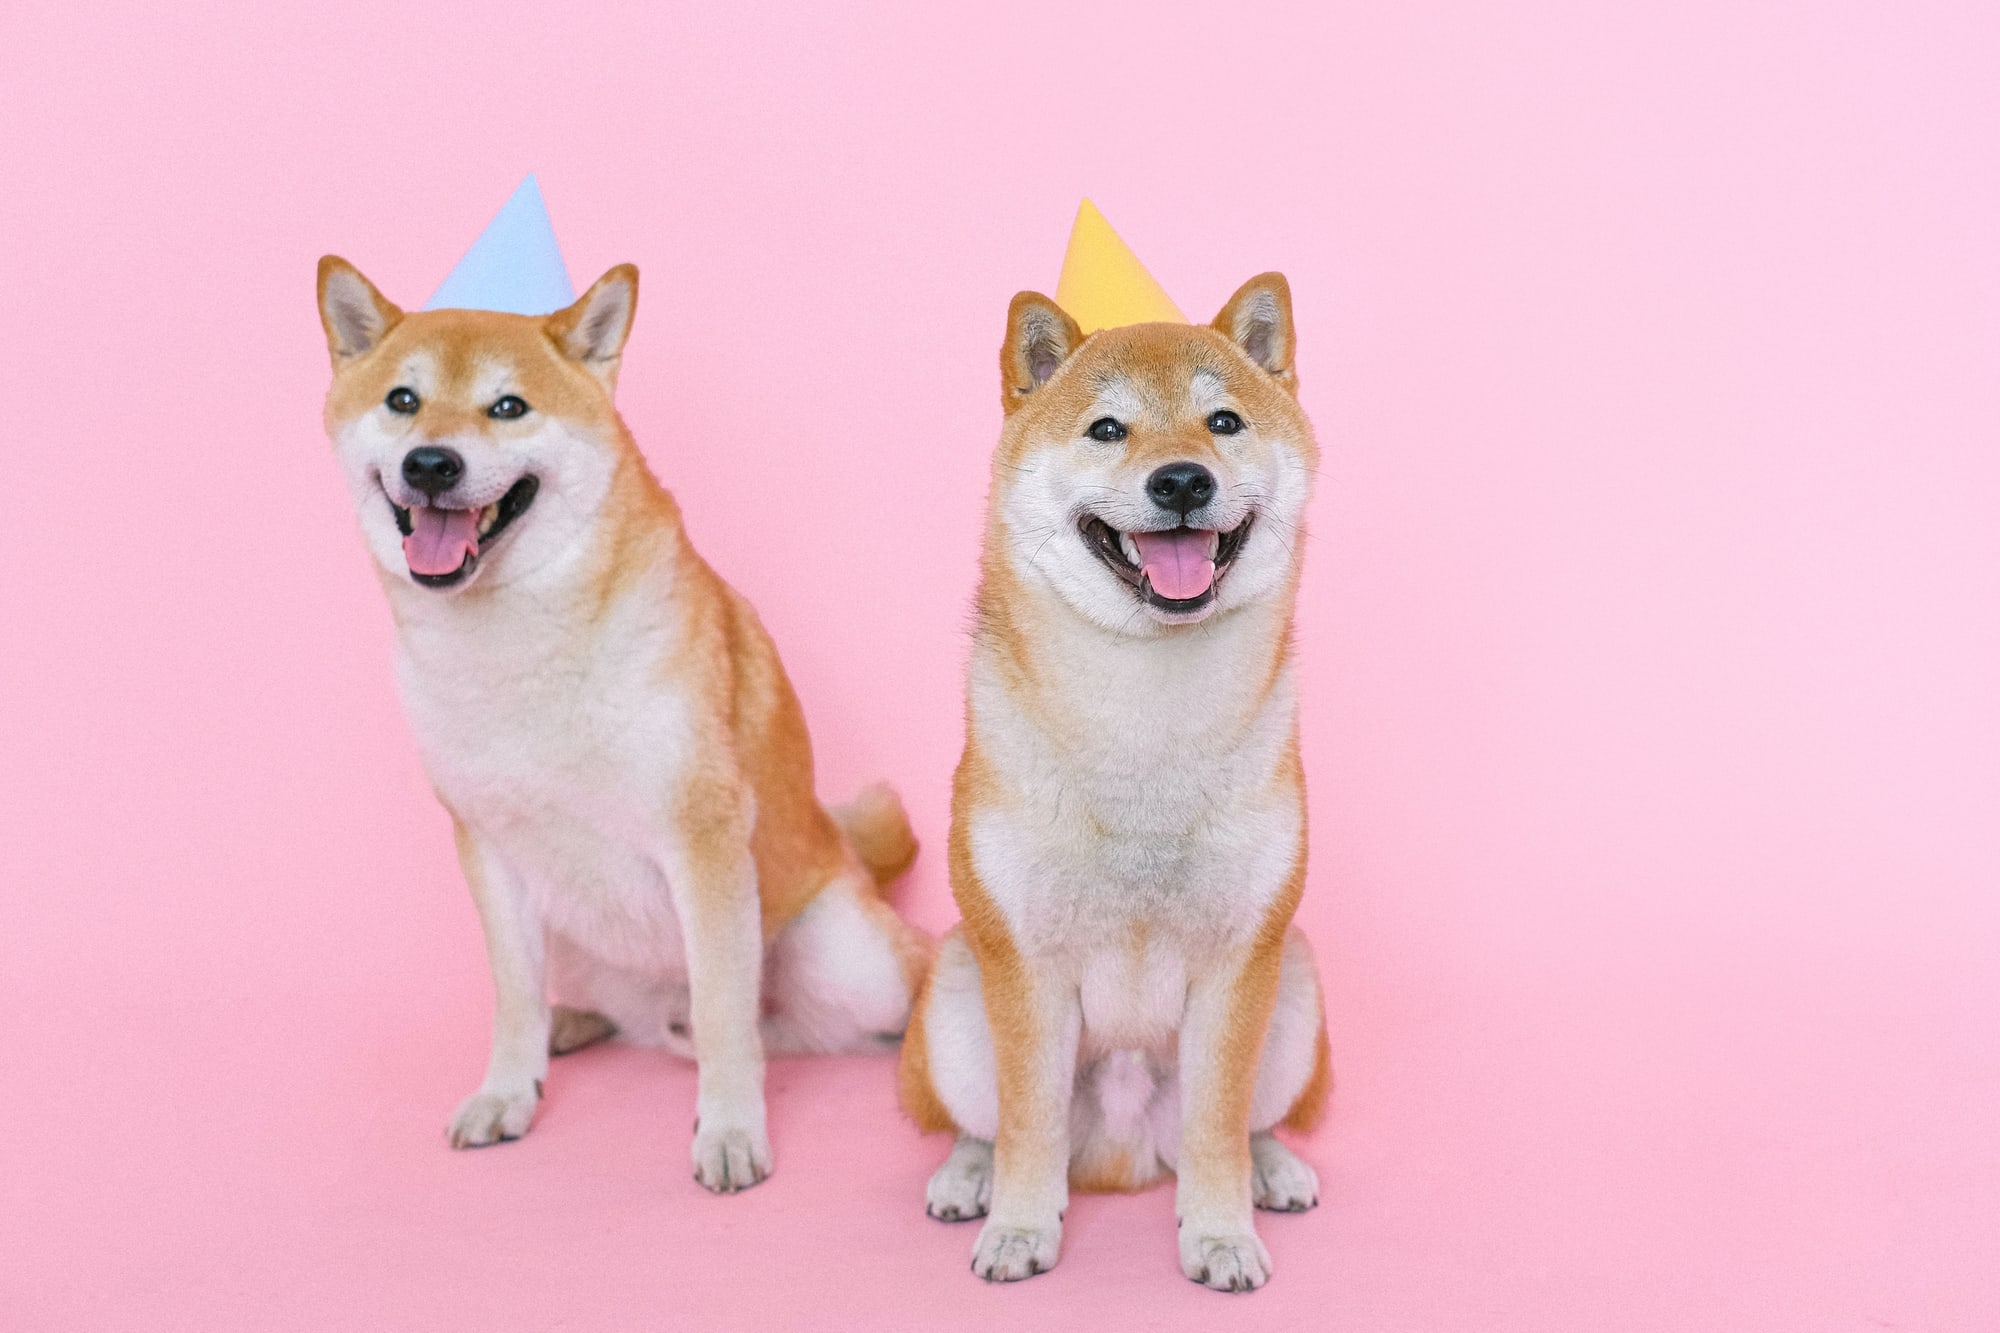 Image of two dogs sitting next to each other looking happy in front of a pink background. Are you struggling in your relationship? As a San Diego couples therapist Jordan can help you find joy and closeness. Reach out and learn how couples therapy in San Diego, CA can help you.